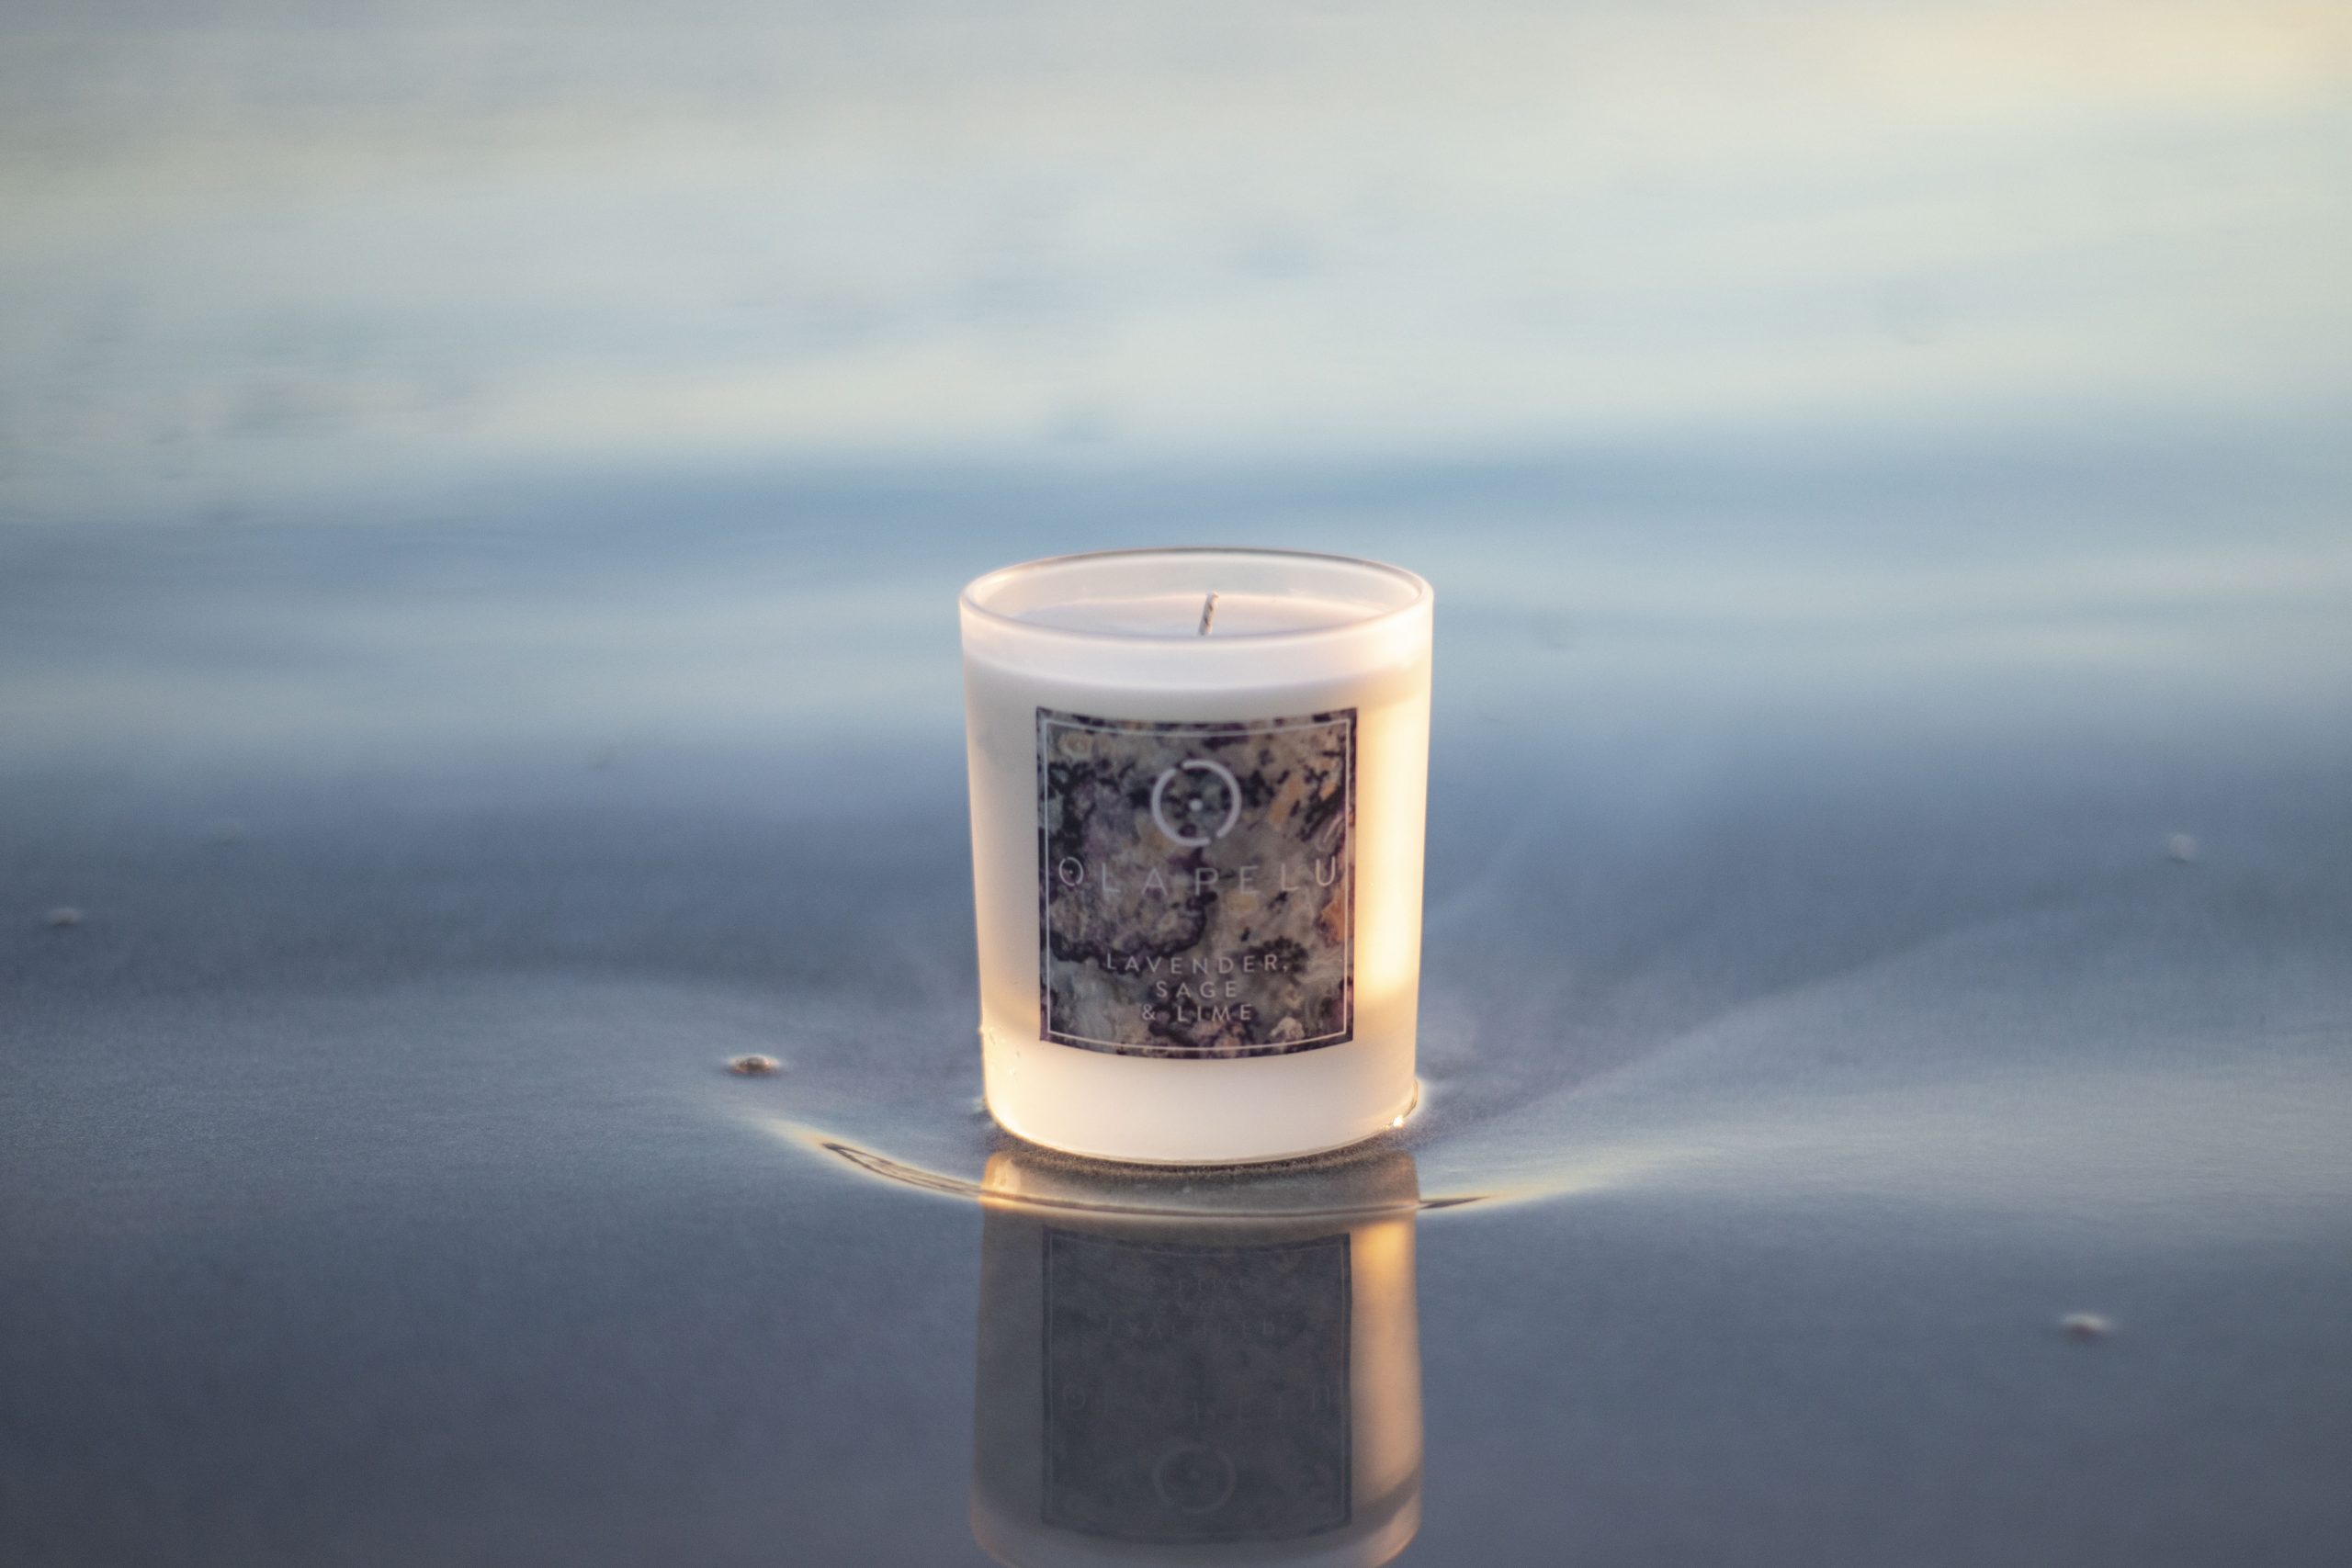 LAVENDER, SAGE & LIME - ESSENTIAL OIL CANDLE - OLA PELU - Nothing but nature